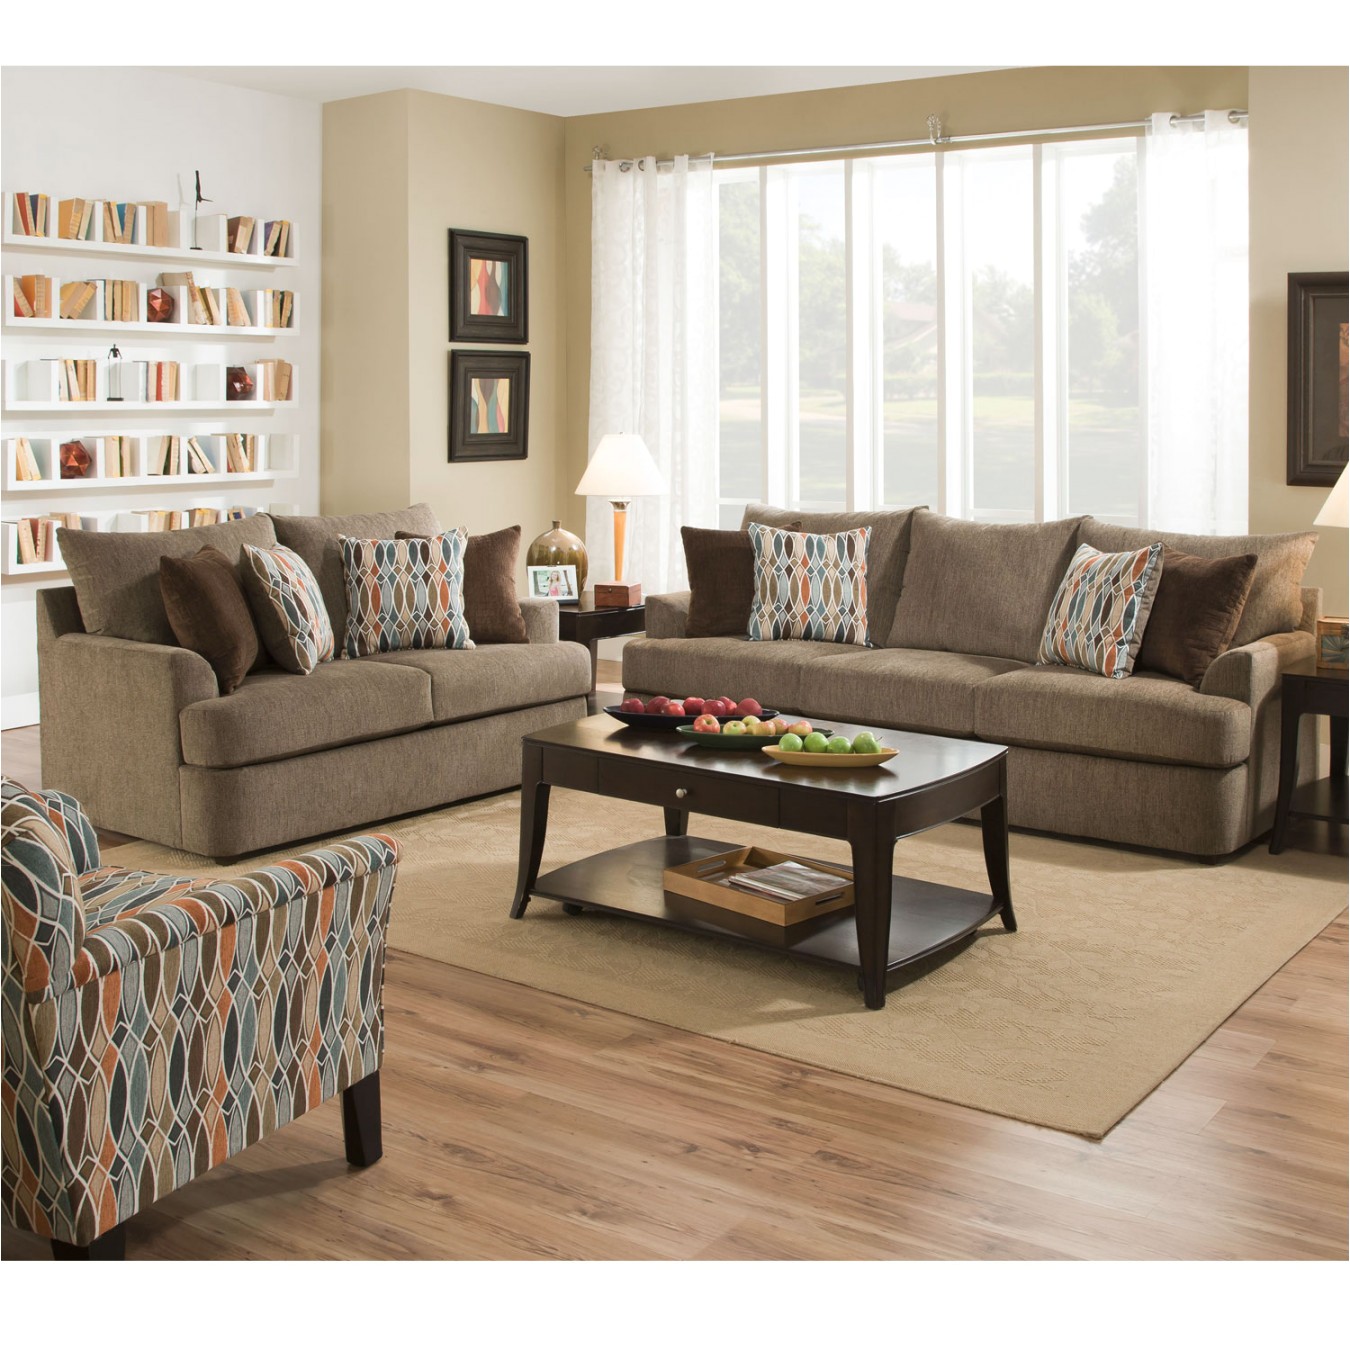 Sofas and Loveseats at Big Lots sofas Marvelous Loveseat Cover Loveseat Recliner Big Lots Home